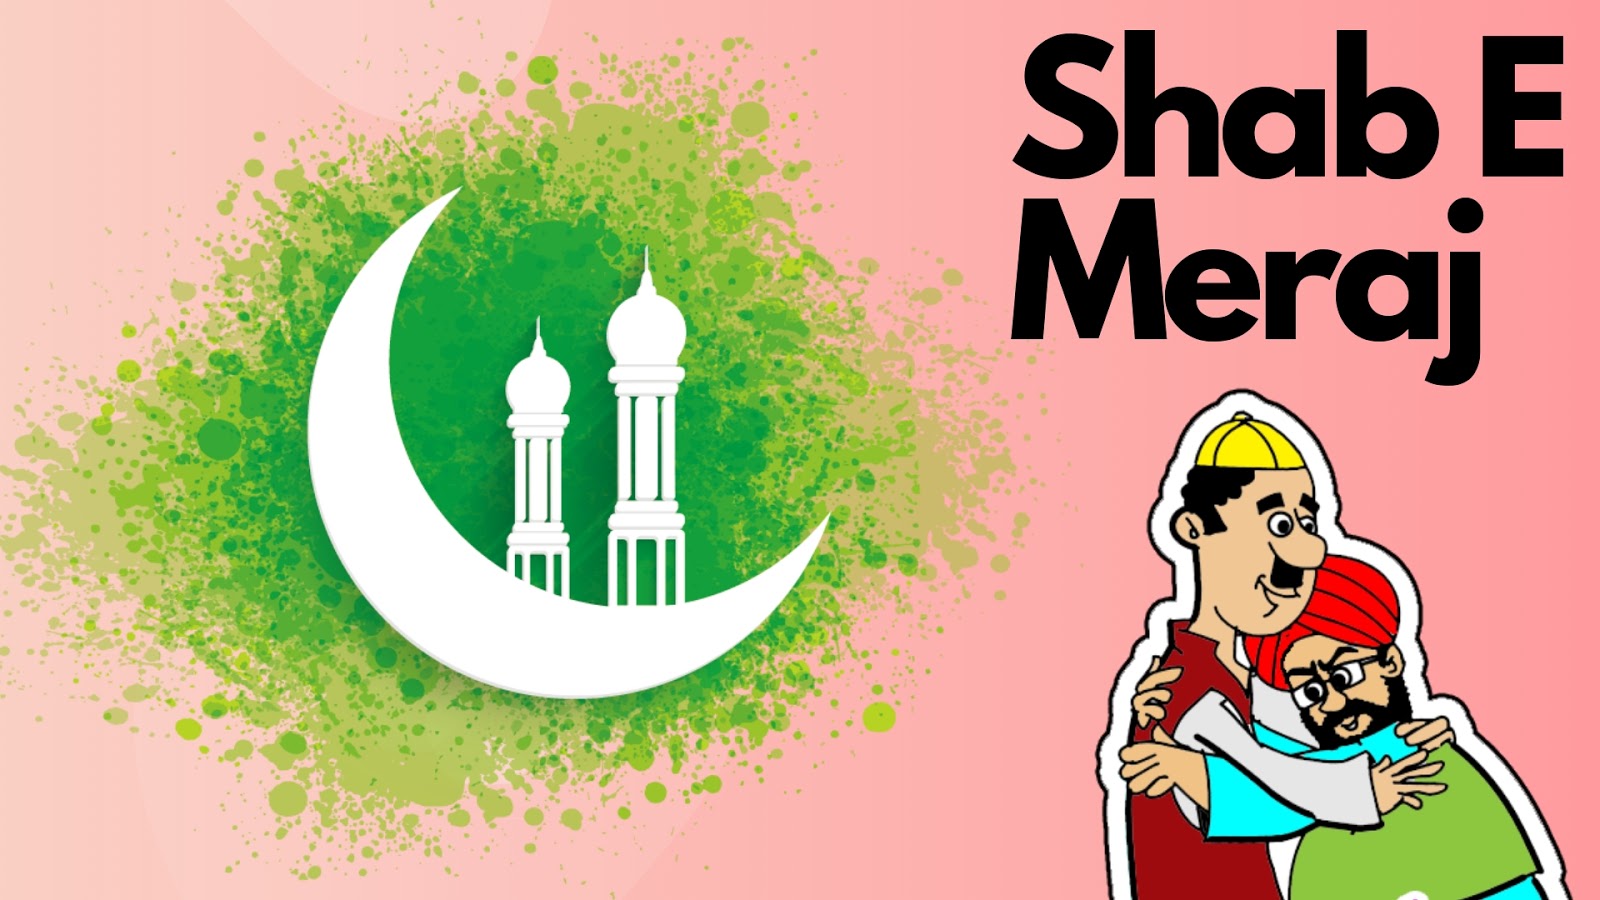 Shab E Meraj Wishes Images, Shab E Meraj Quotes Images, - Islamic Images Hd Png , HD Wallpaper & Backgrounds